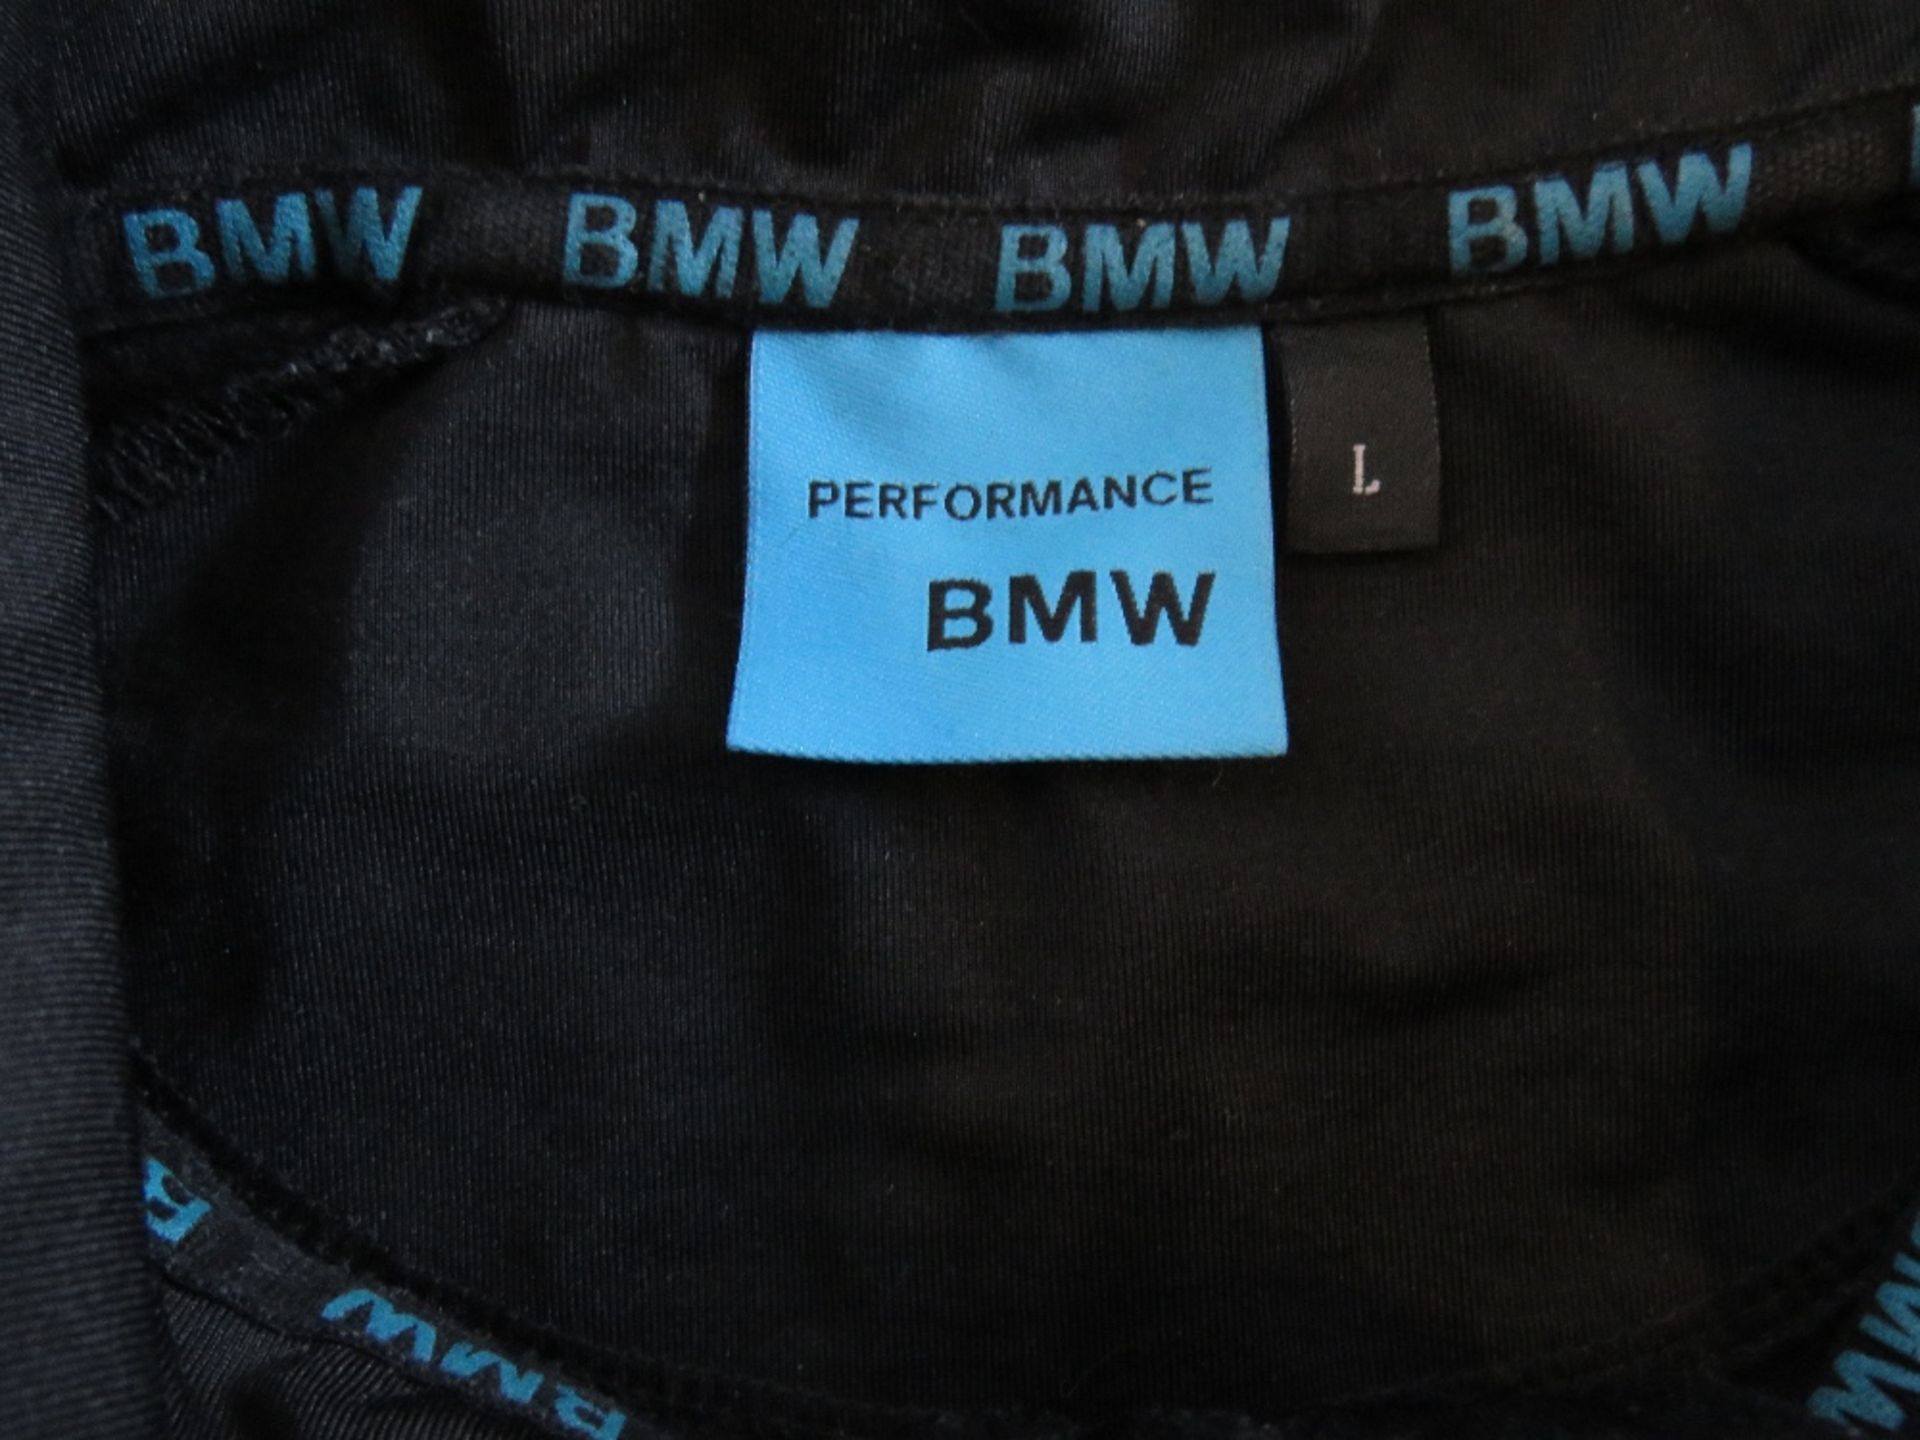 A BMW performance jacket size L. - Image 2 of 2